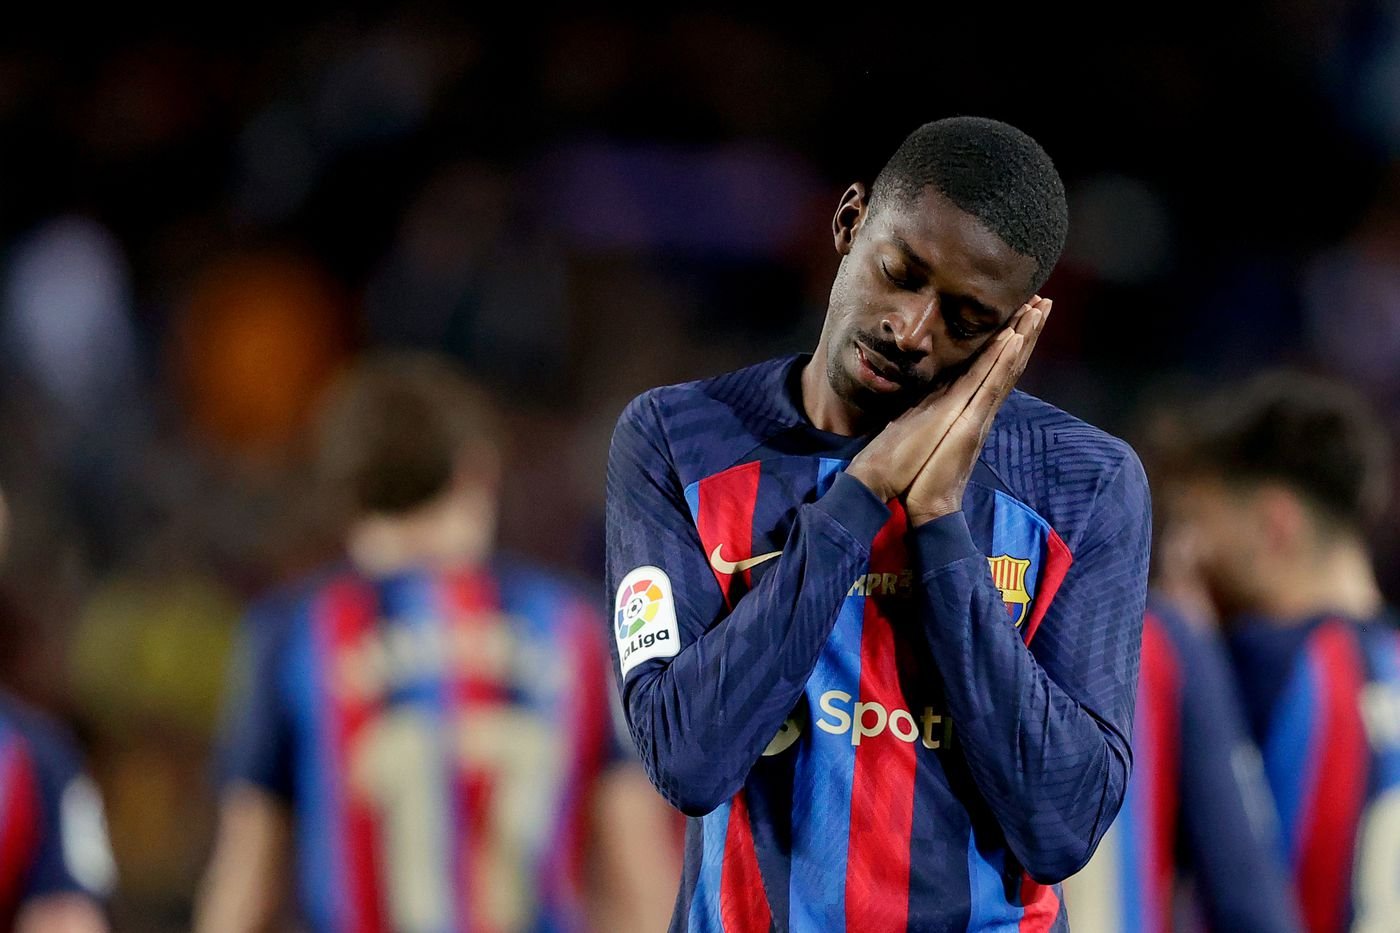 Barcelona wants to renew Ousmane Dembele's contract at Camp Nou before the start of new season